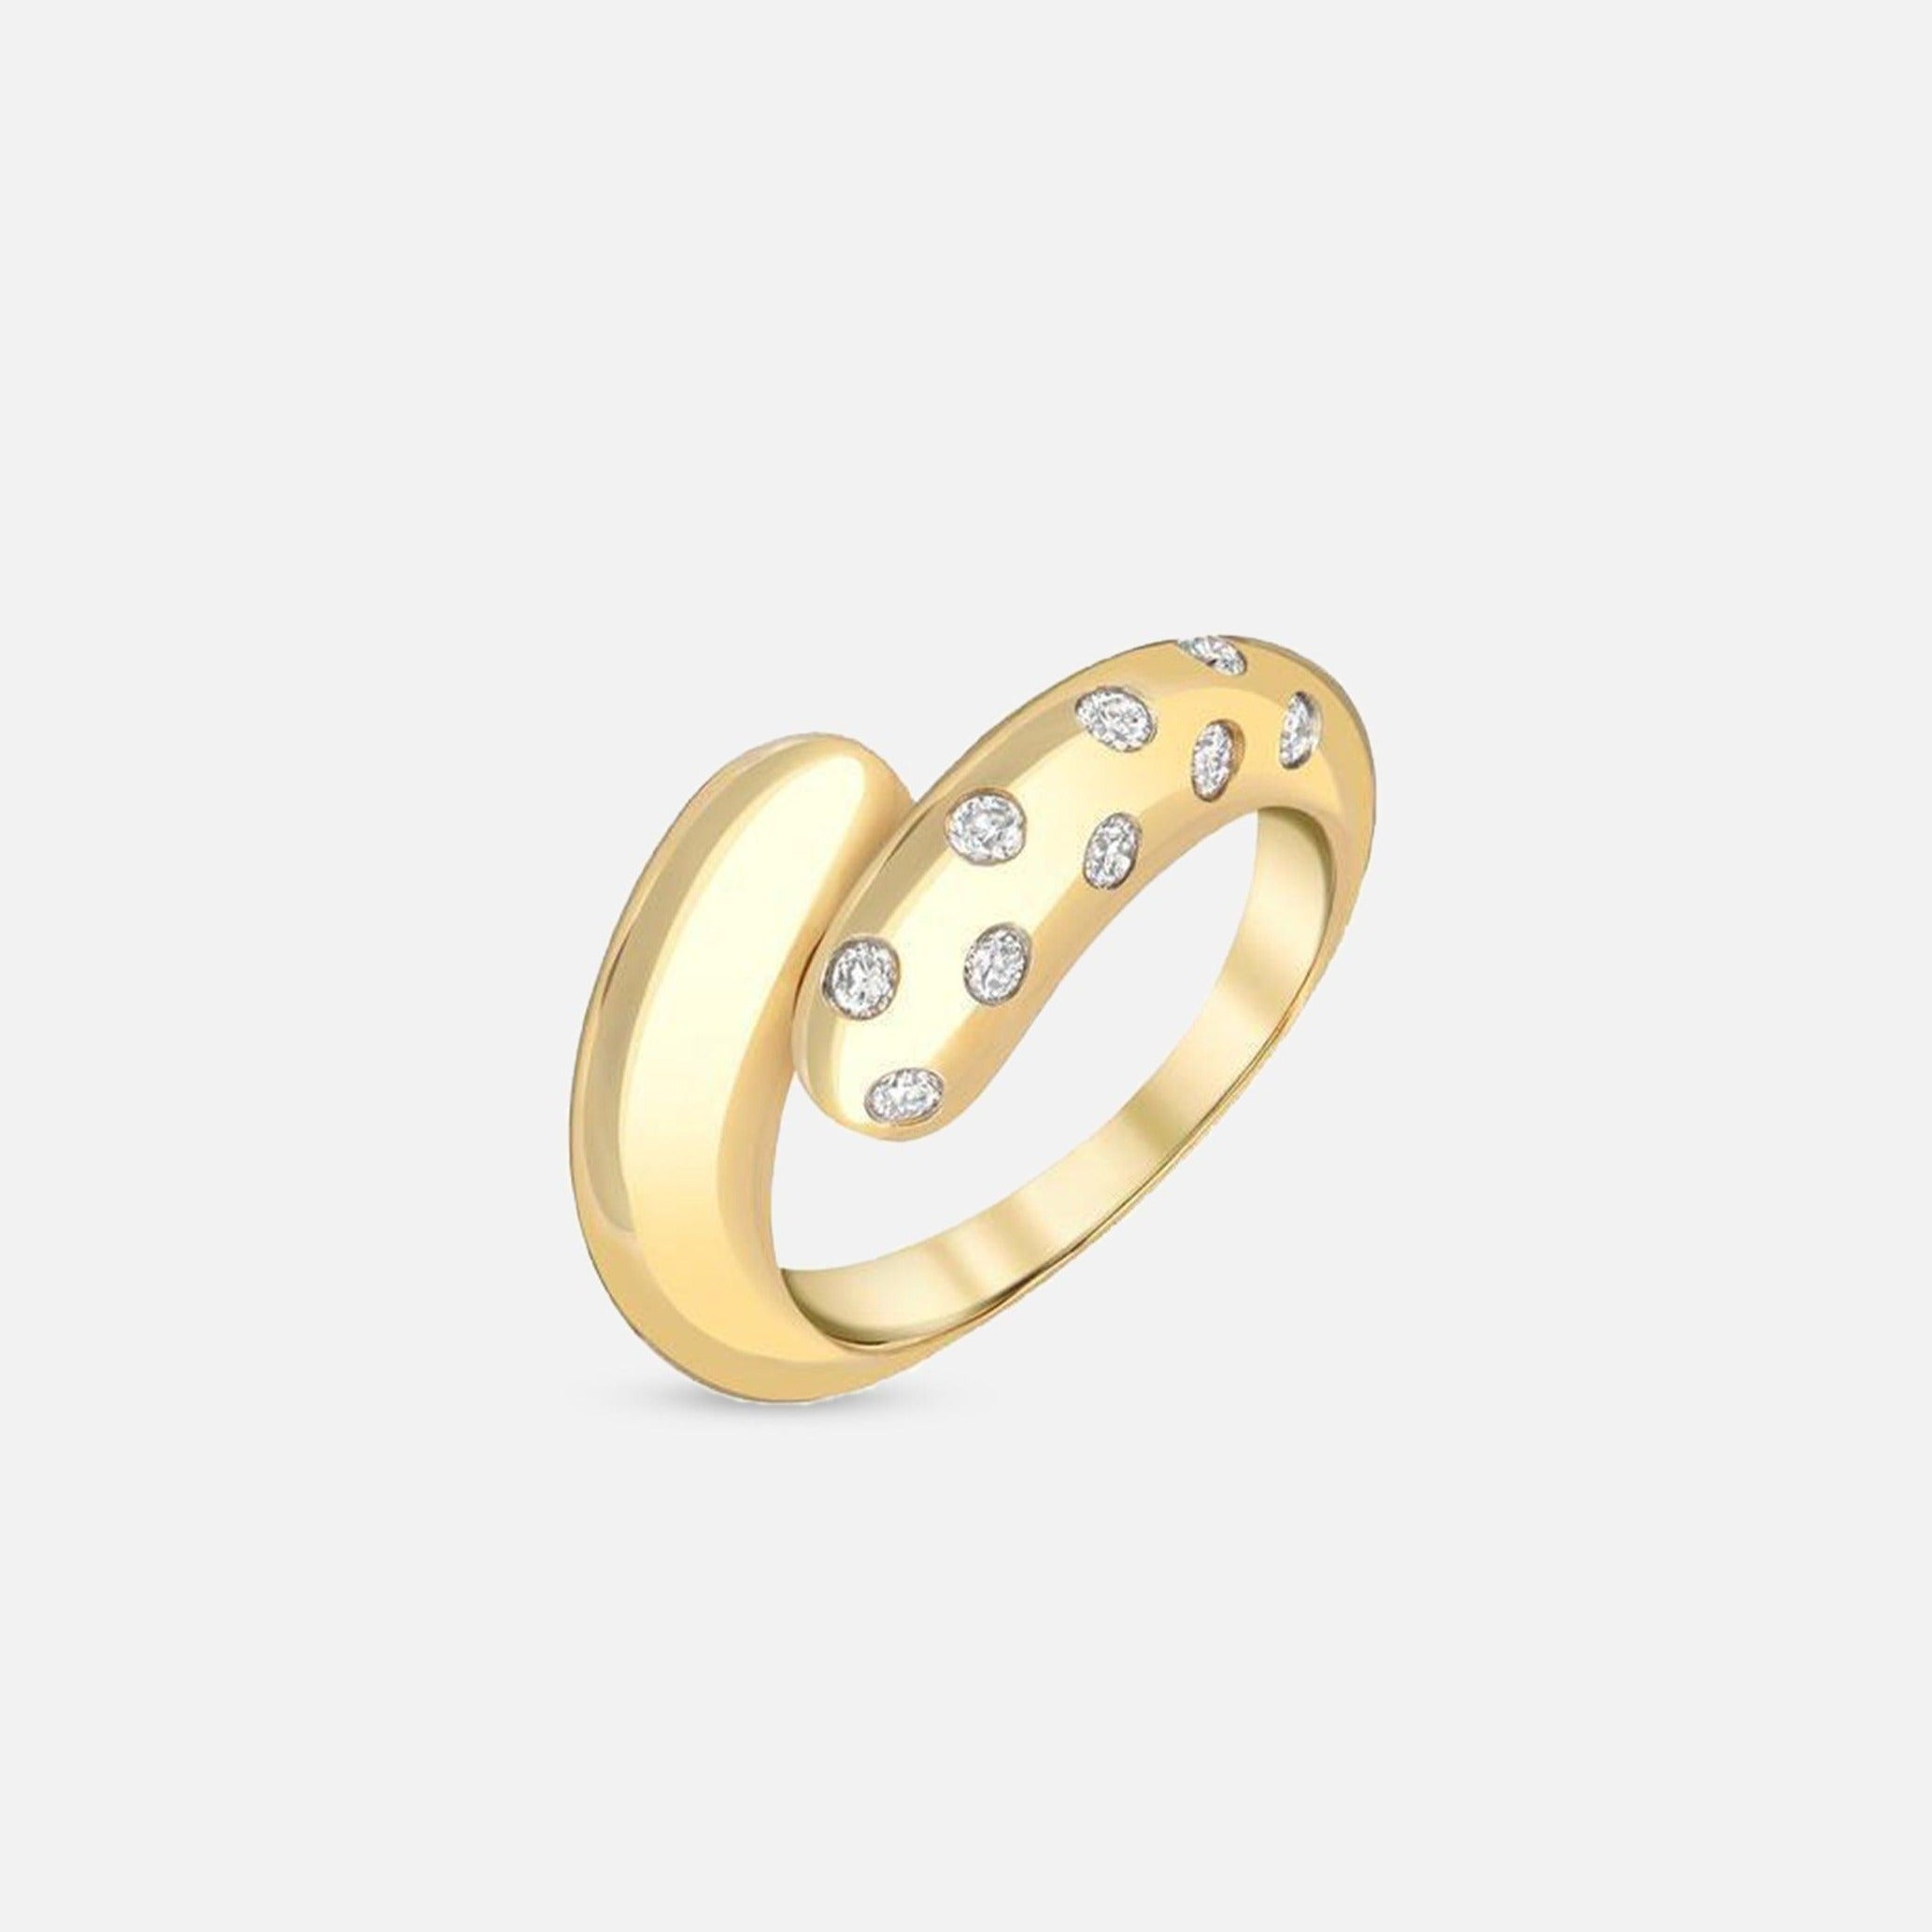 Stacy Nolan Petal Wrap Ring with Scattered Diamonds 2